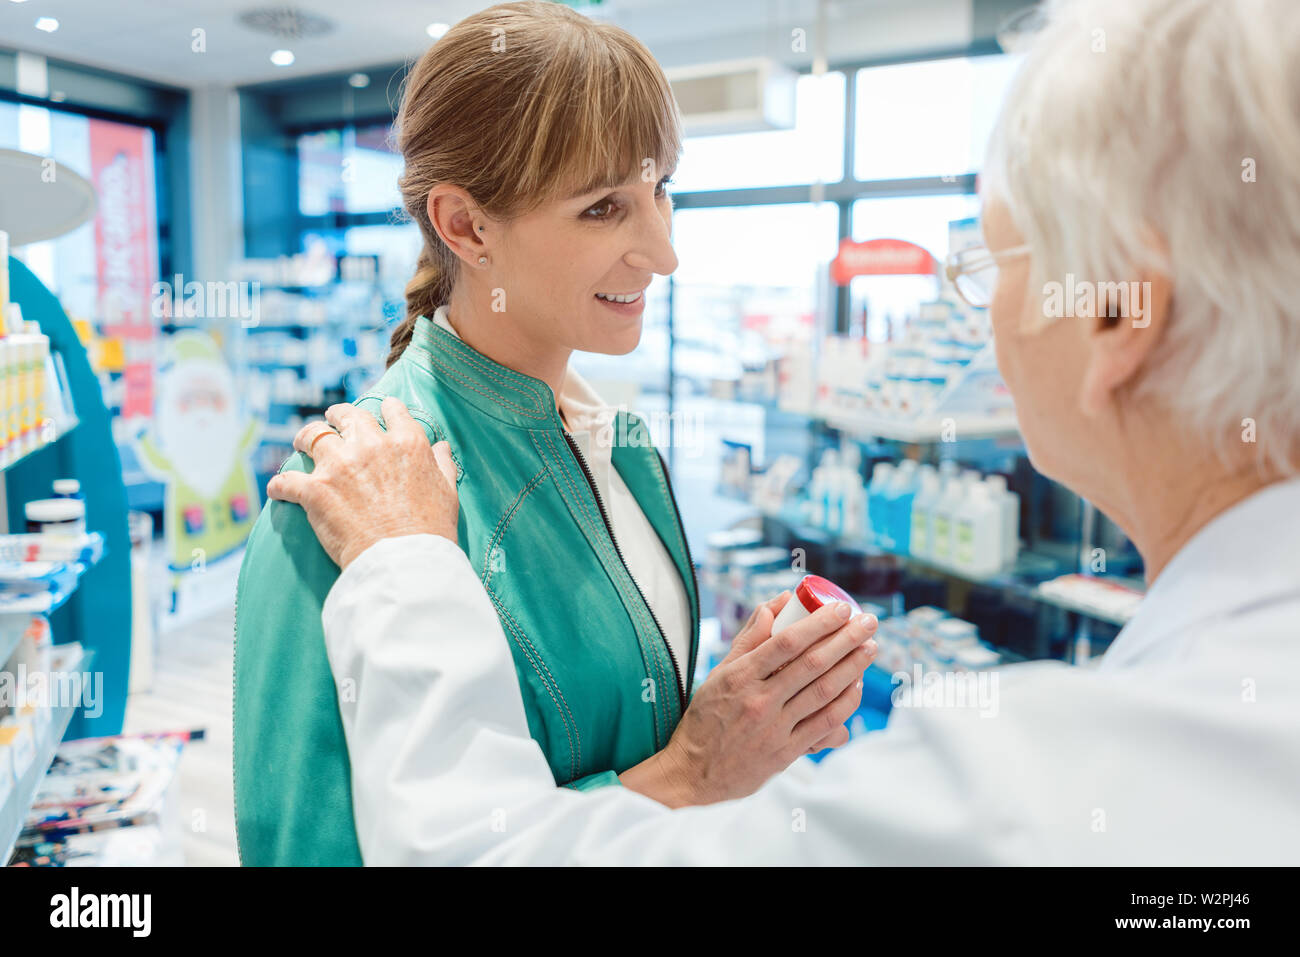 Woman customer in pharmacy buying drug hoping to get better Stock Photo